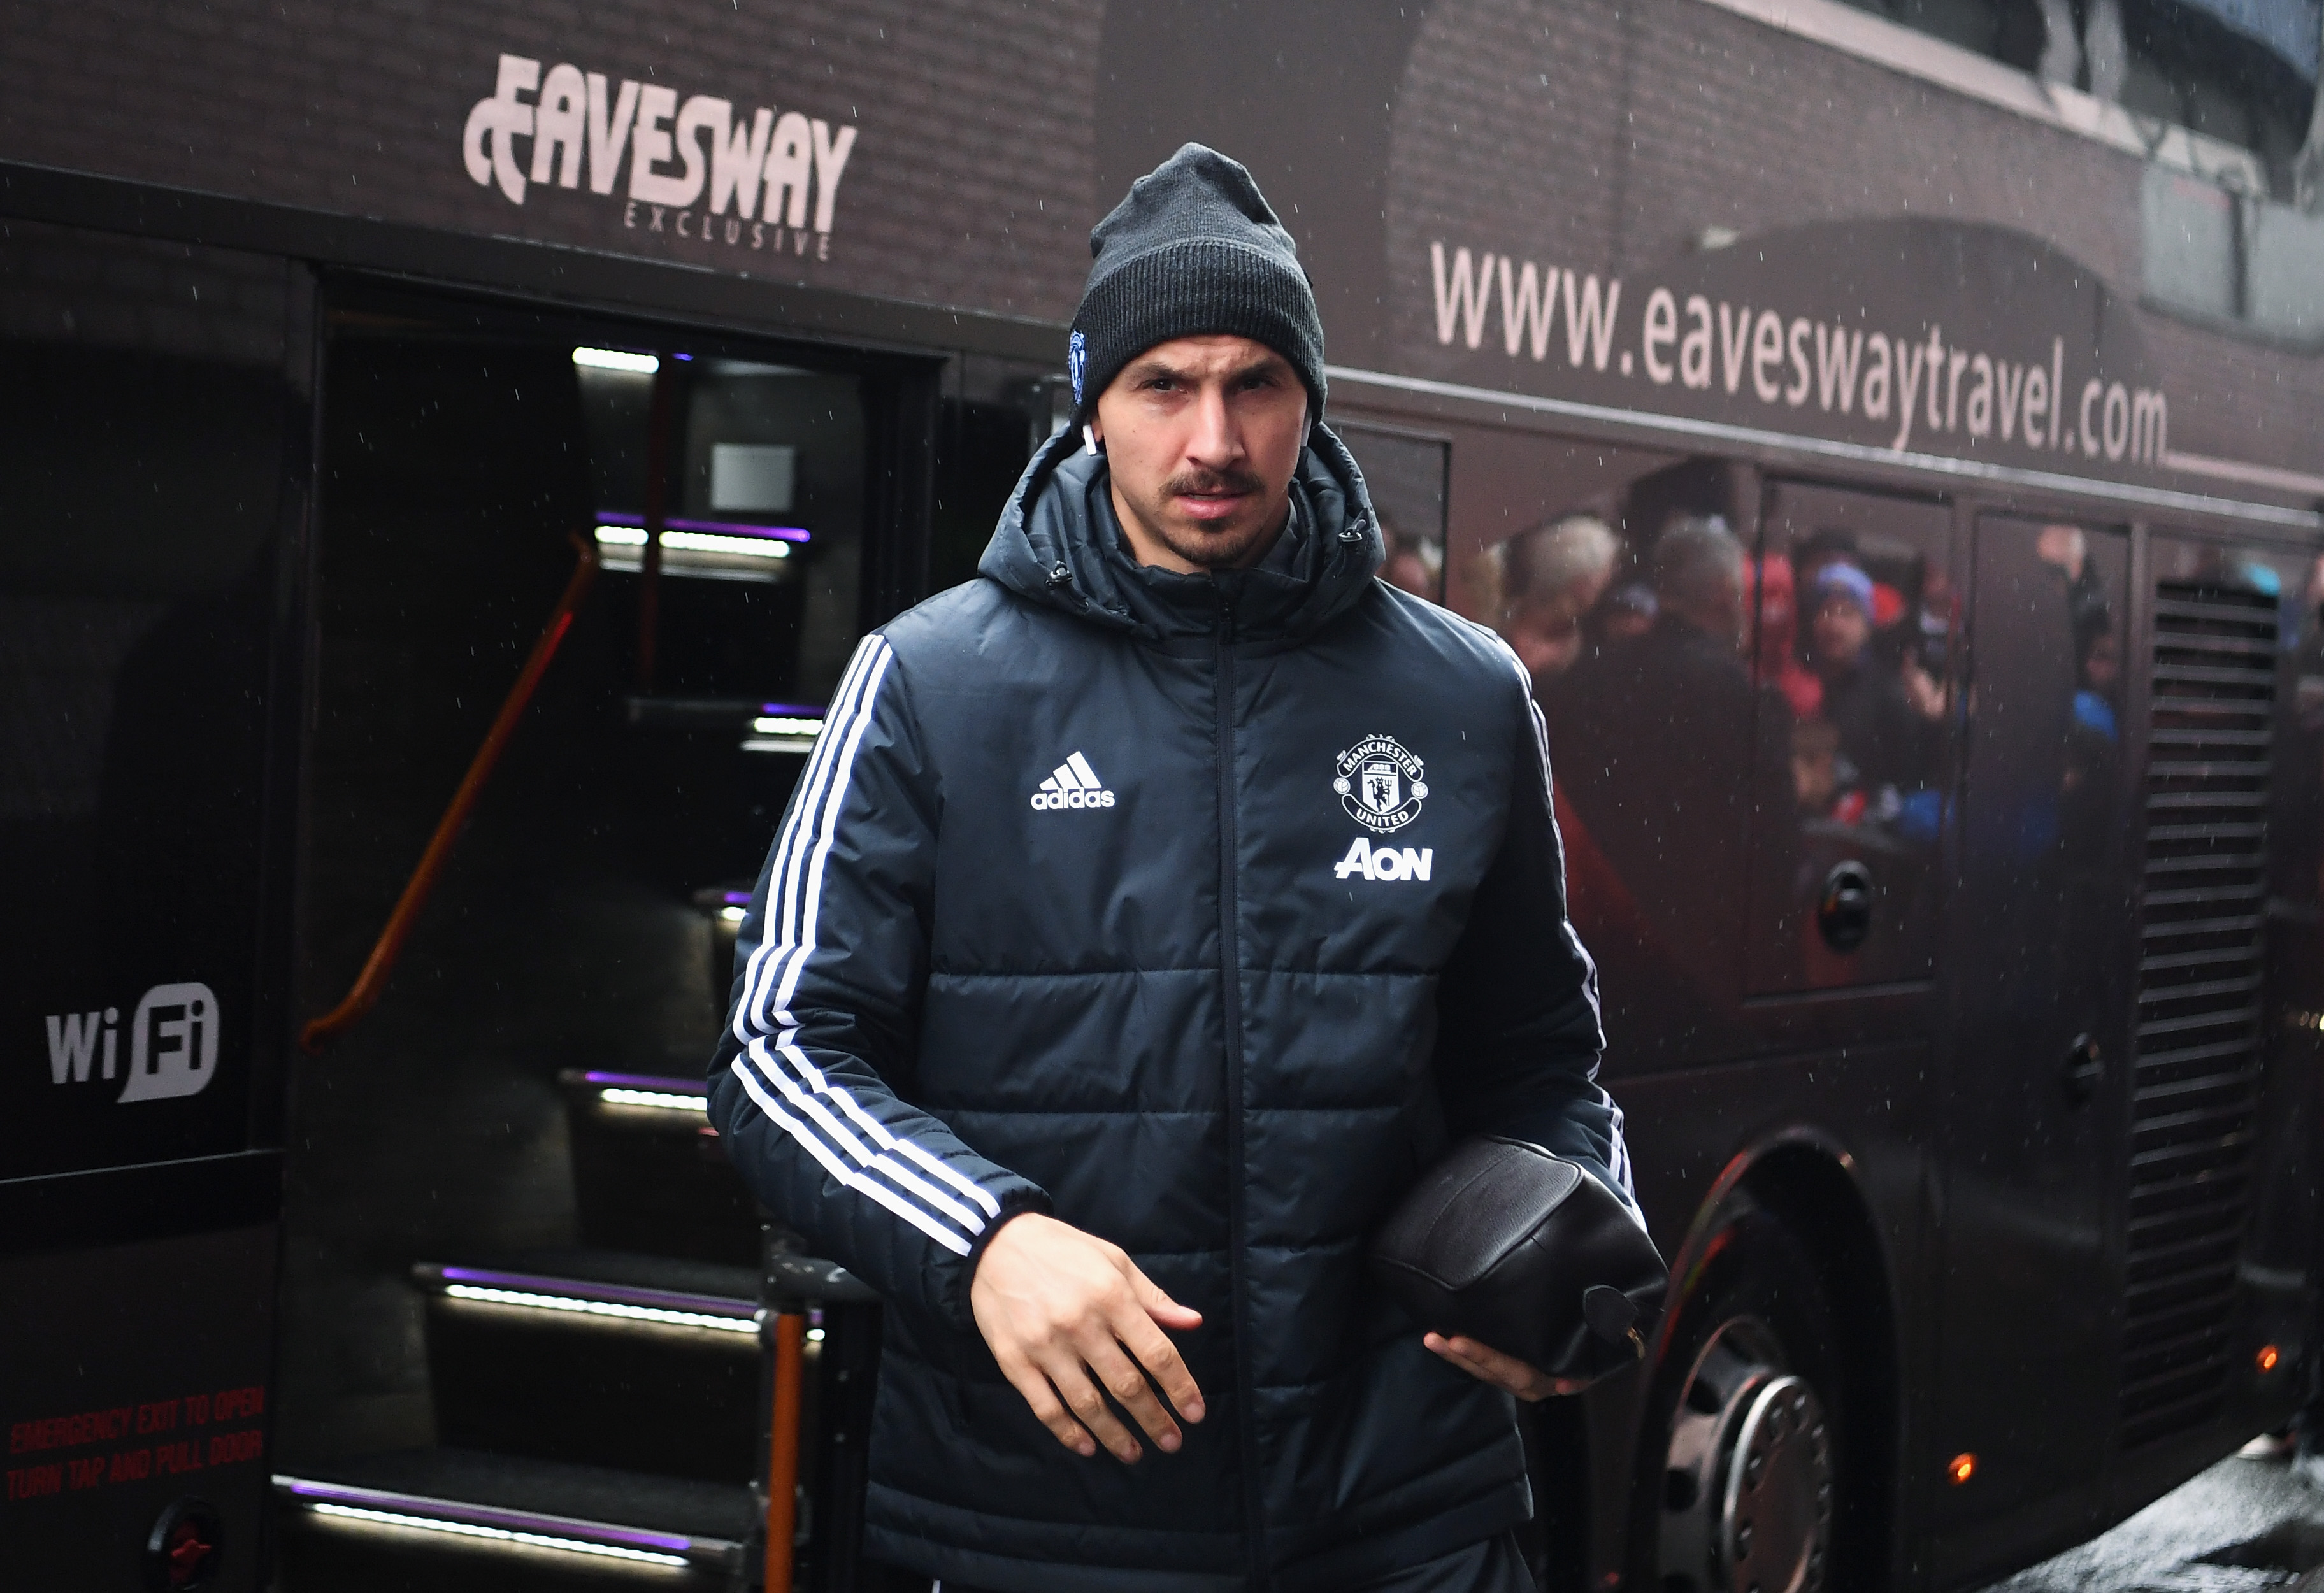 WEST BROMWICH, ENGLAND - DECEMBER 17:  Zlatan Ibrahimovic of Manchester United arrives for the Premier League match between West Bromwich Albion and Manchester United at The Hawthorns on December 17, 2017 in West Bromwich, England.  (Photo by Michael Regan/Getty Images)